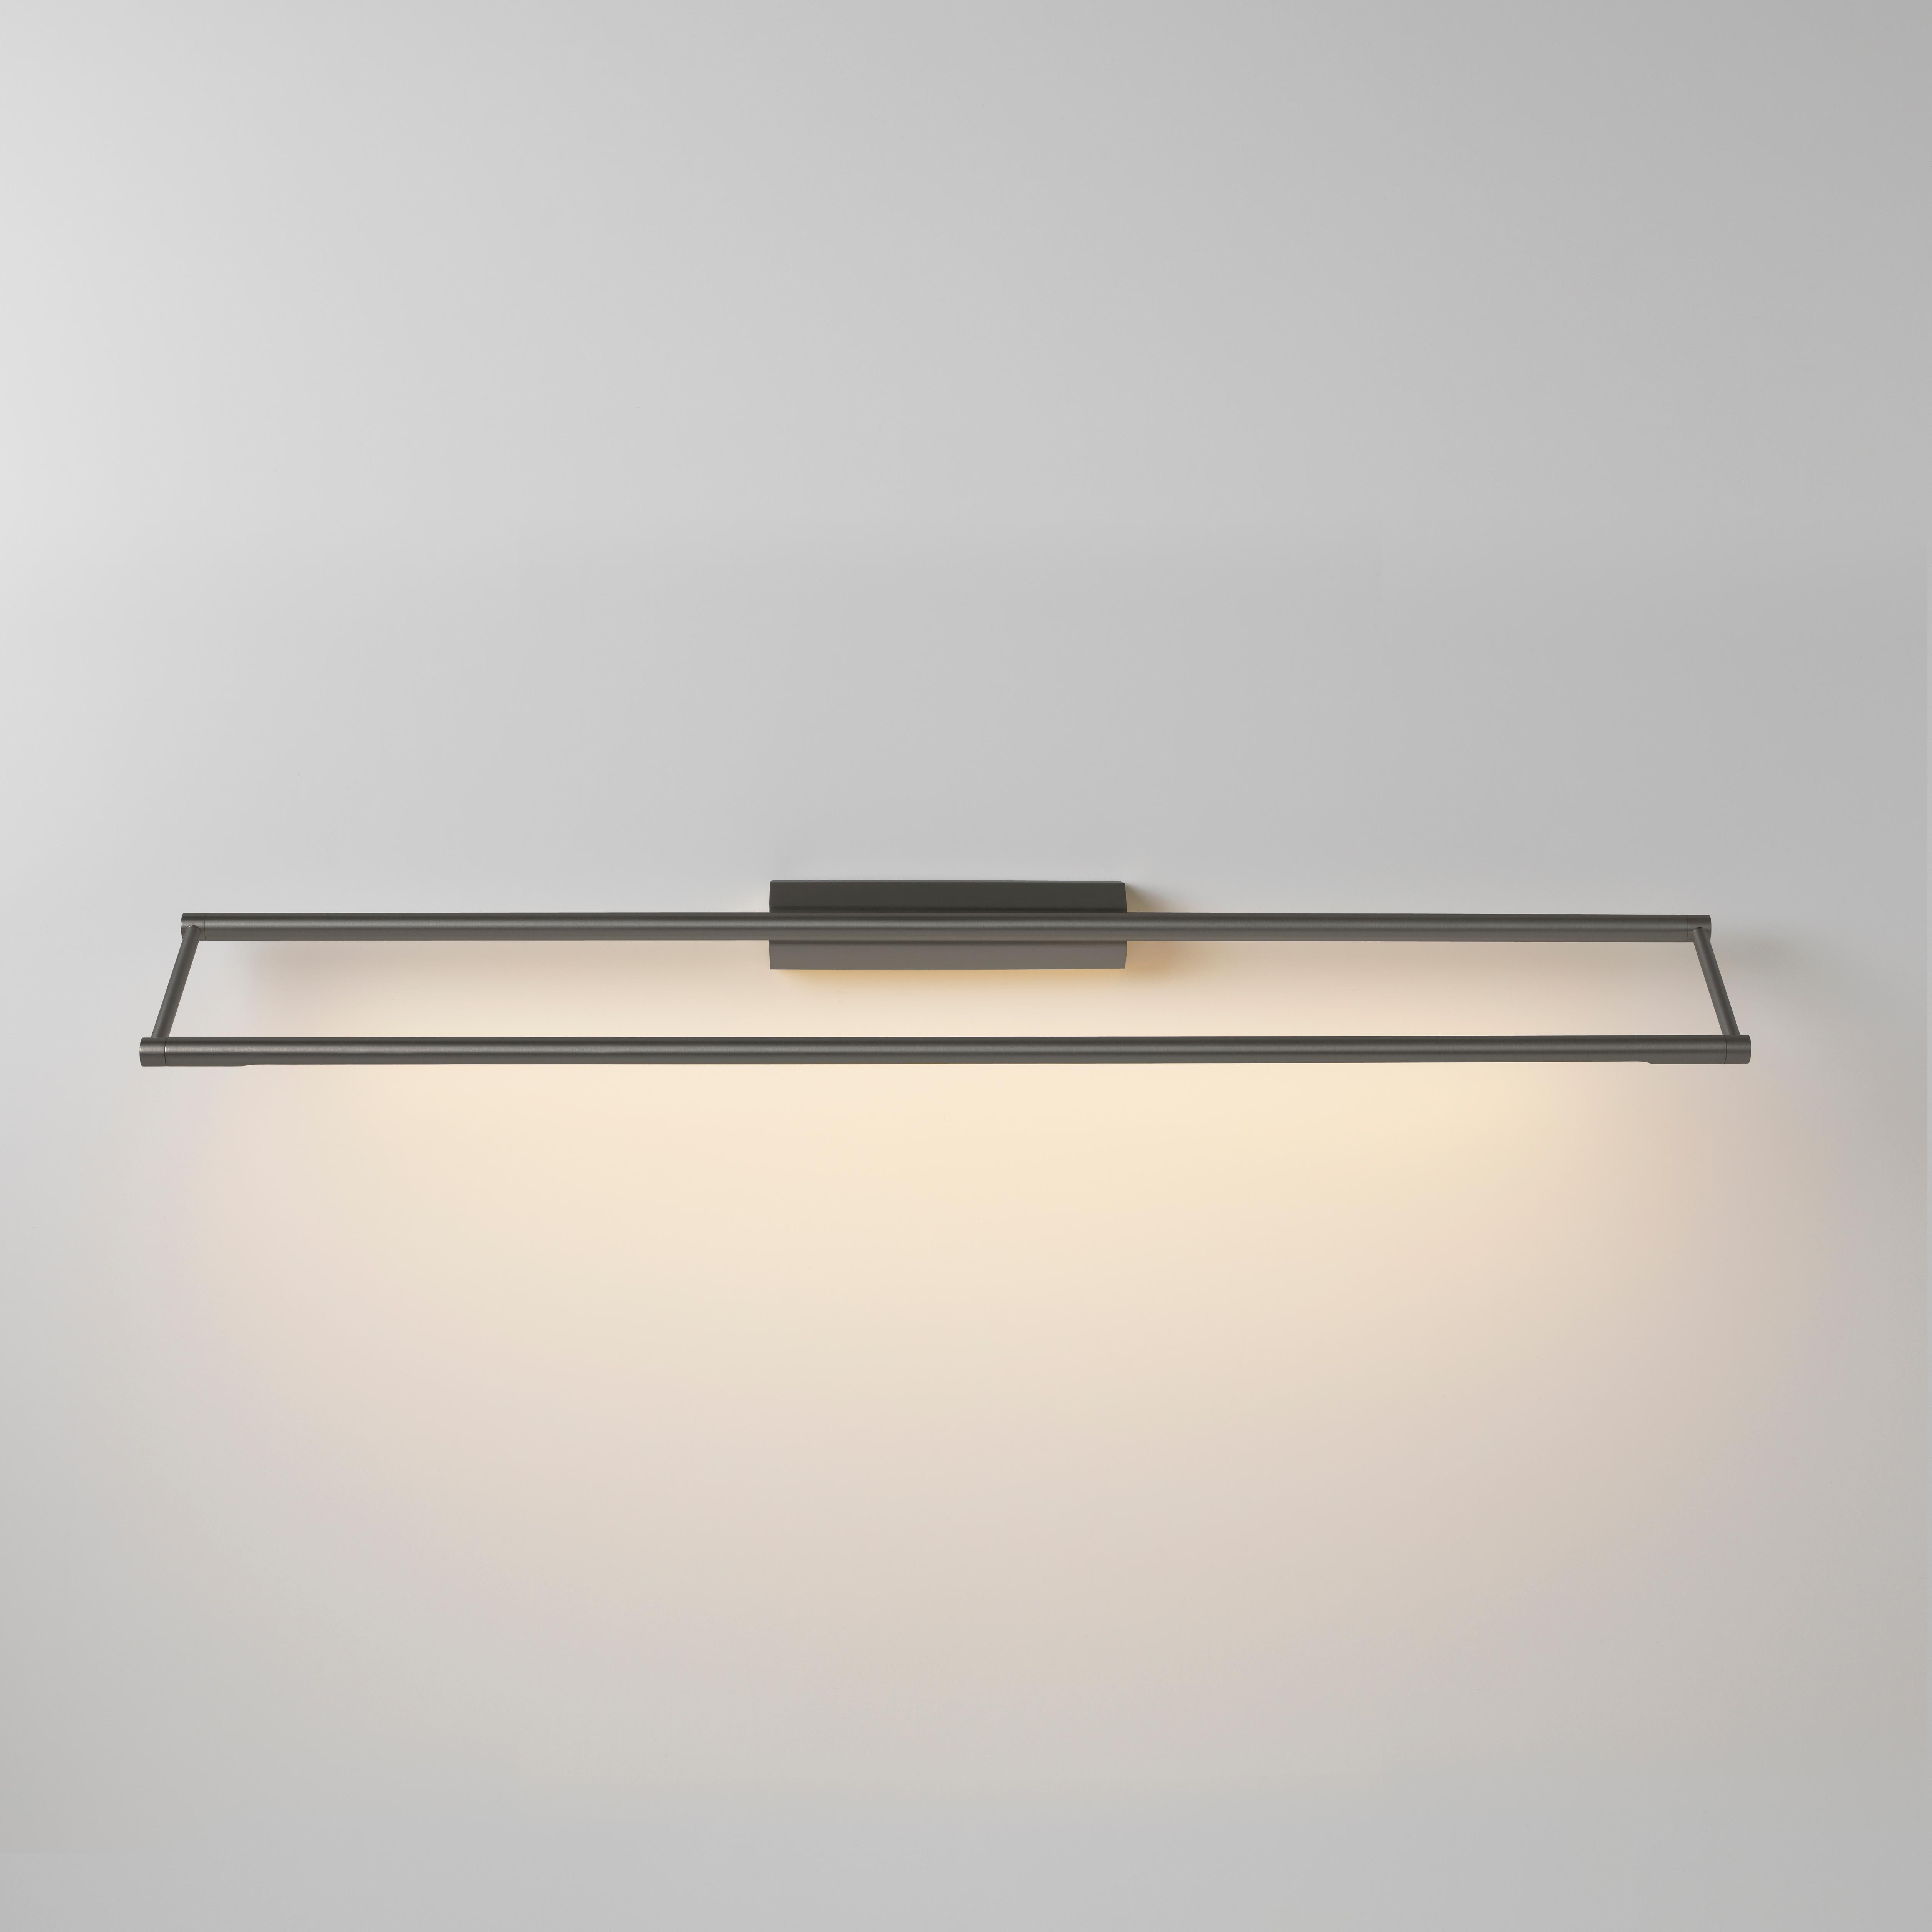 Link 725 Graphite wall light by Emilie Cathelineau
Dimensions: D 72.5 x W 11.5 x H 4.4 cm
Materials: Solid brass, Satin Polycarbonate diffuser, Black textile cable (2m)
Others finishes and dimensions are available.

All our lamps can be wired